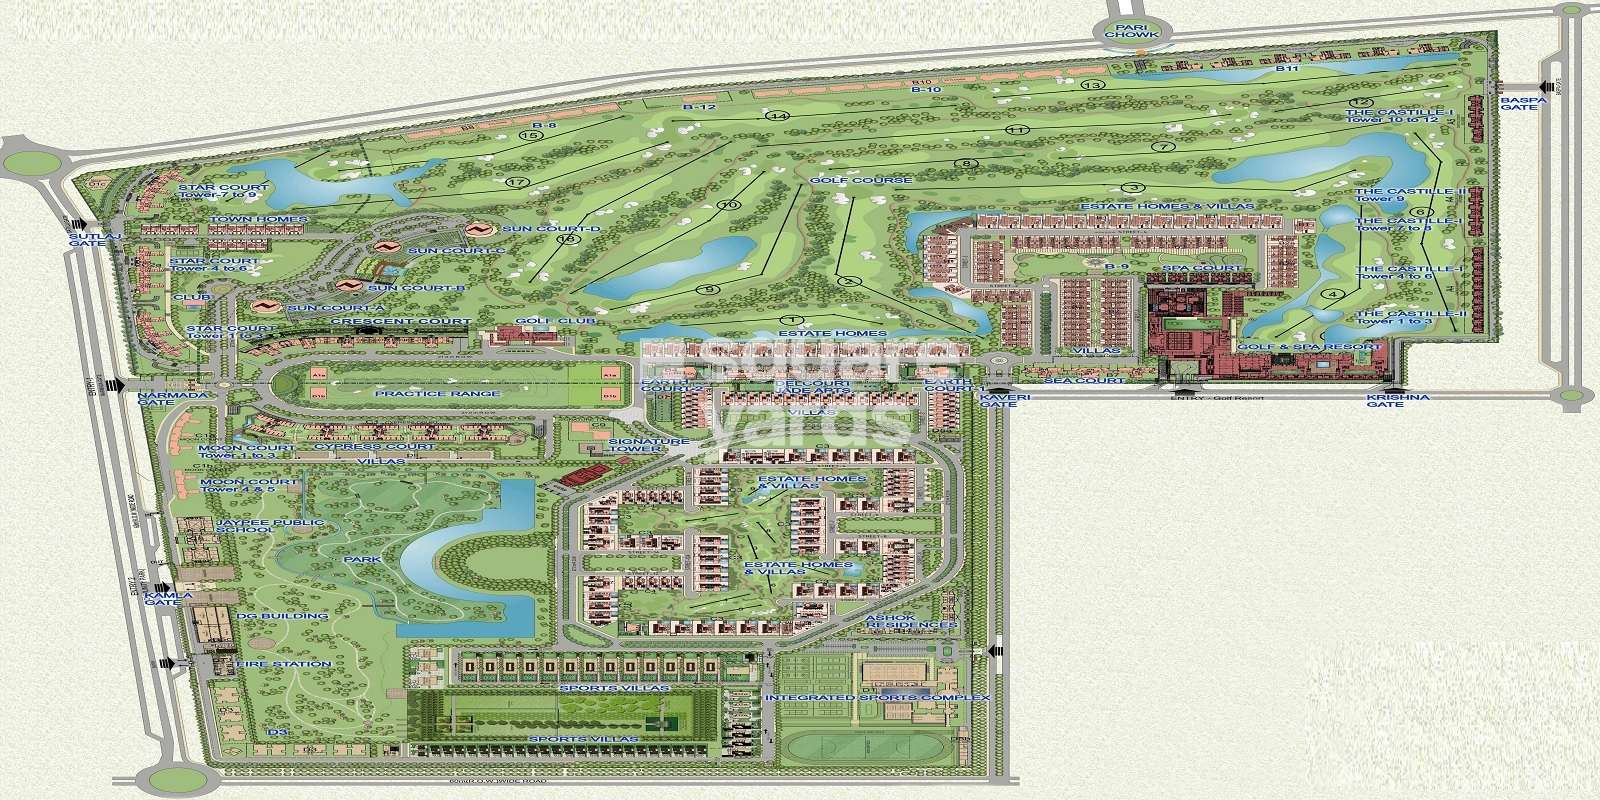 jaypee green crescent court project master plan image1